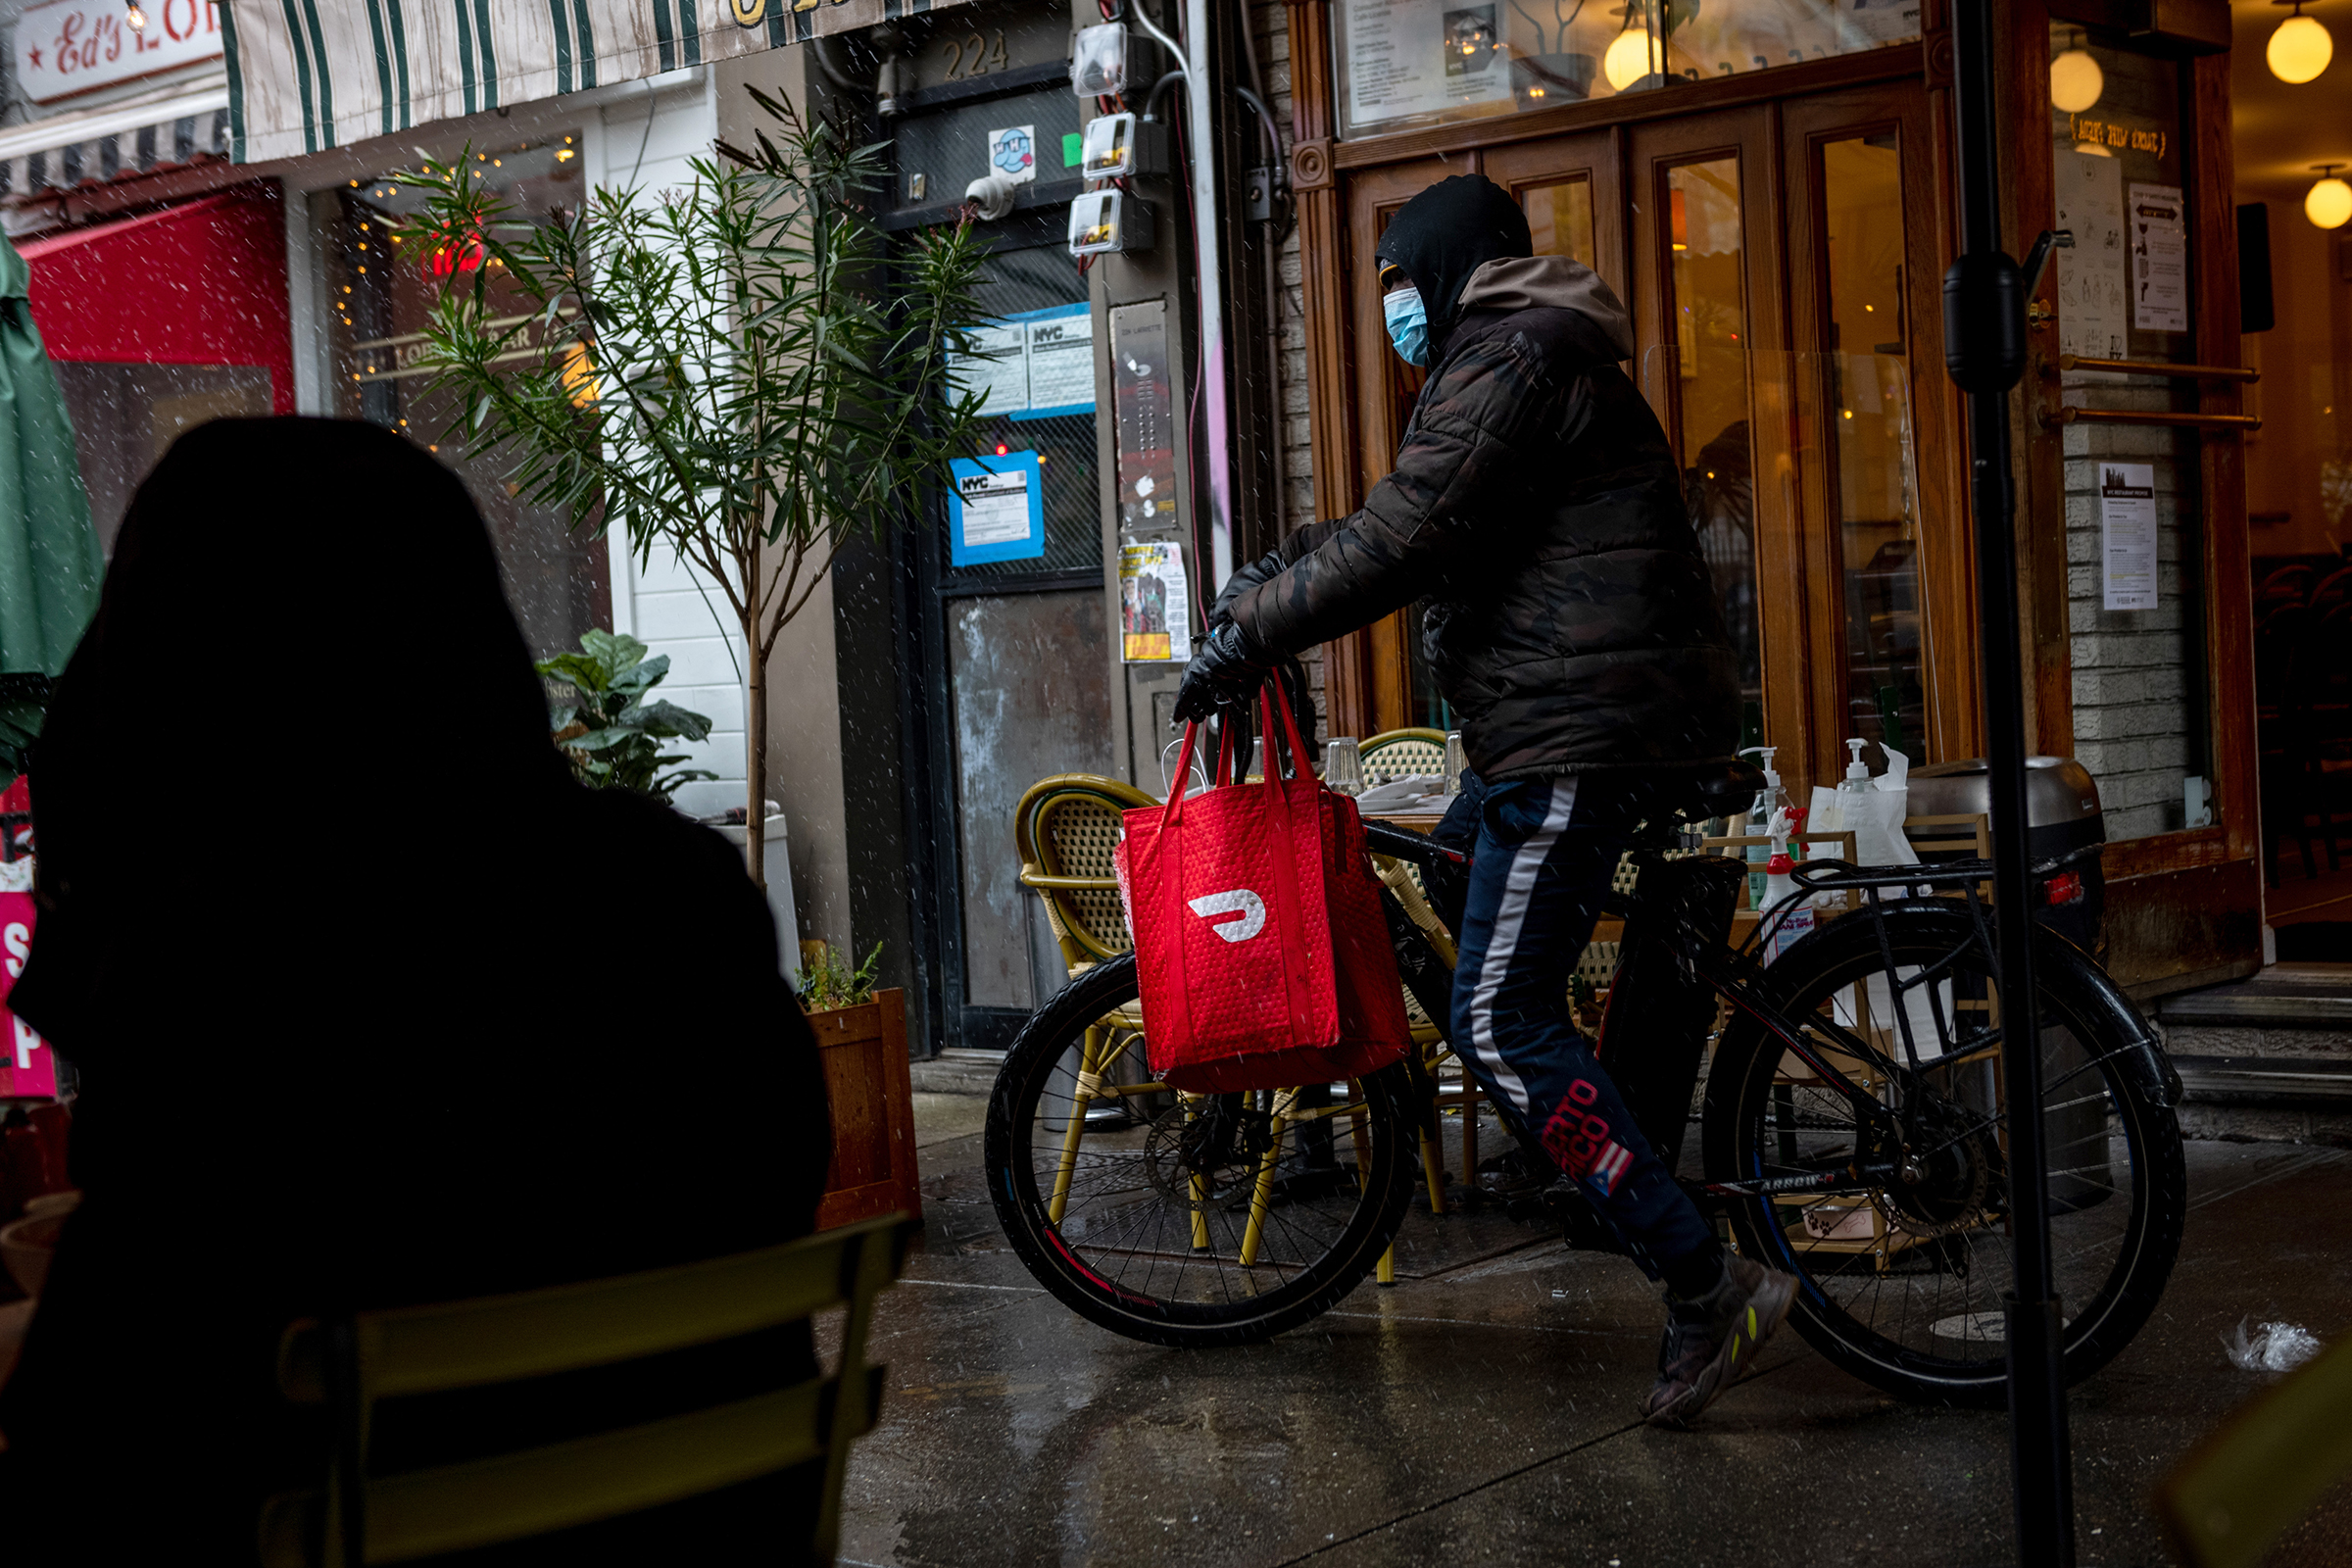 A DoorDash delivery driver riding a bicycle picks up food from Jack's Wife Freda during the first snow of the season on December 09, 2020 in New York City. (Alexi Rosenfeld—Getty Images)